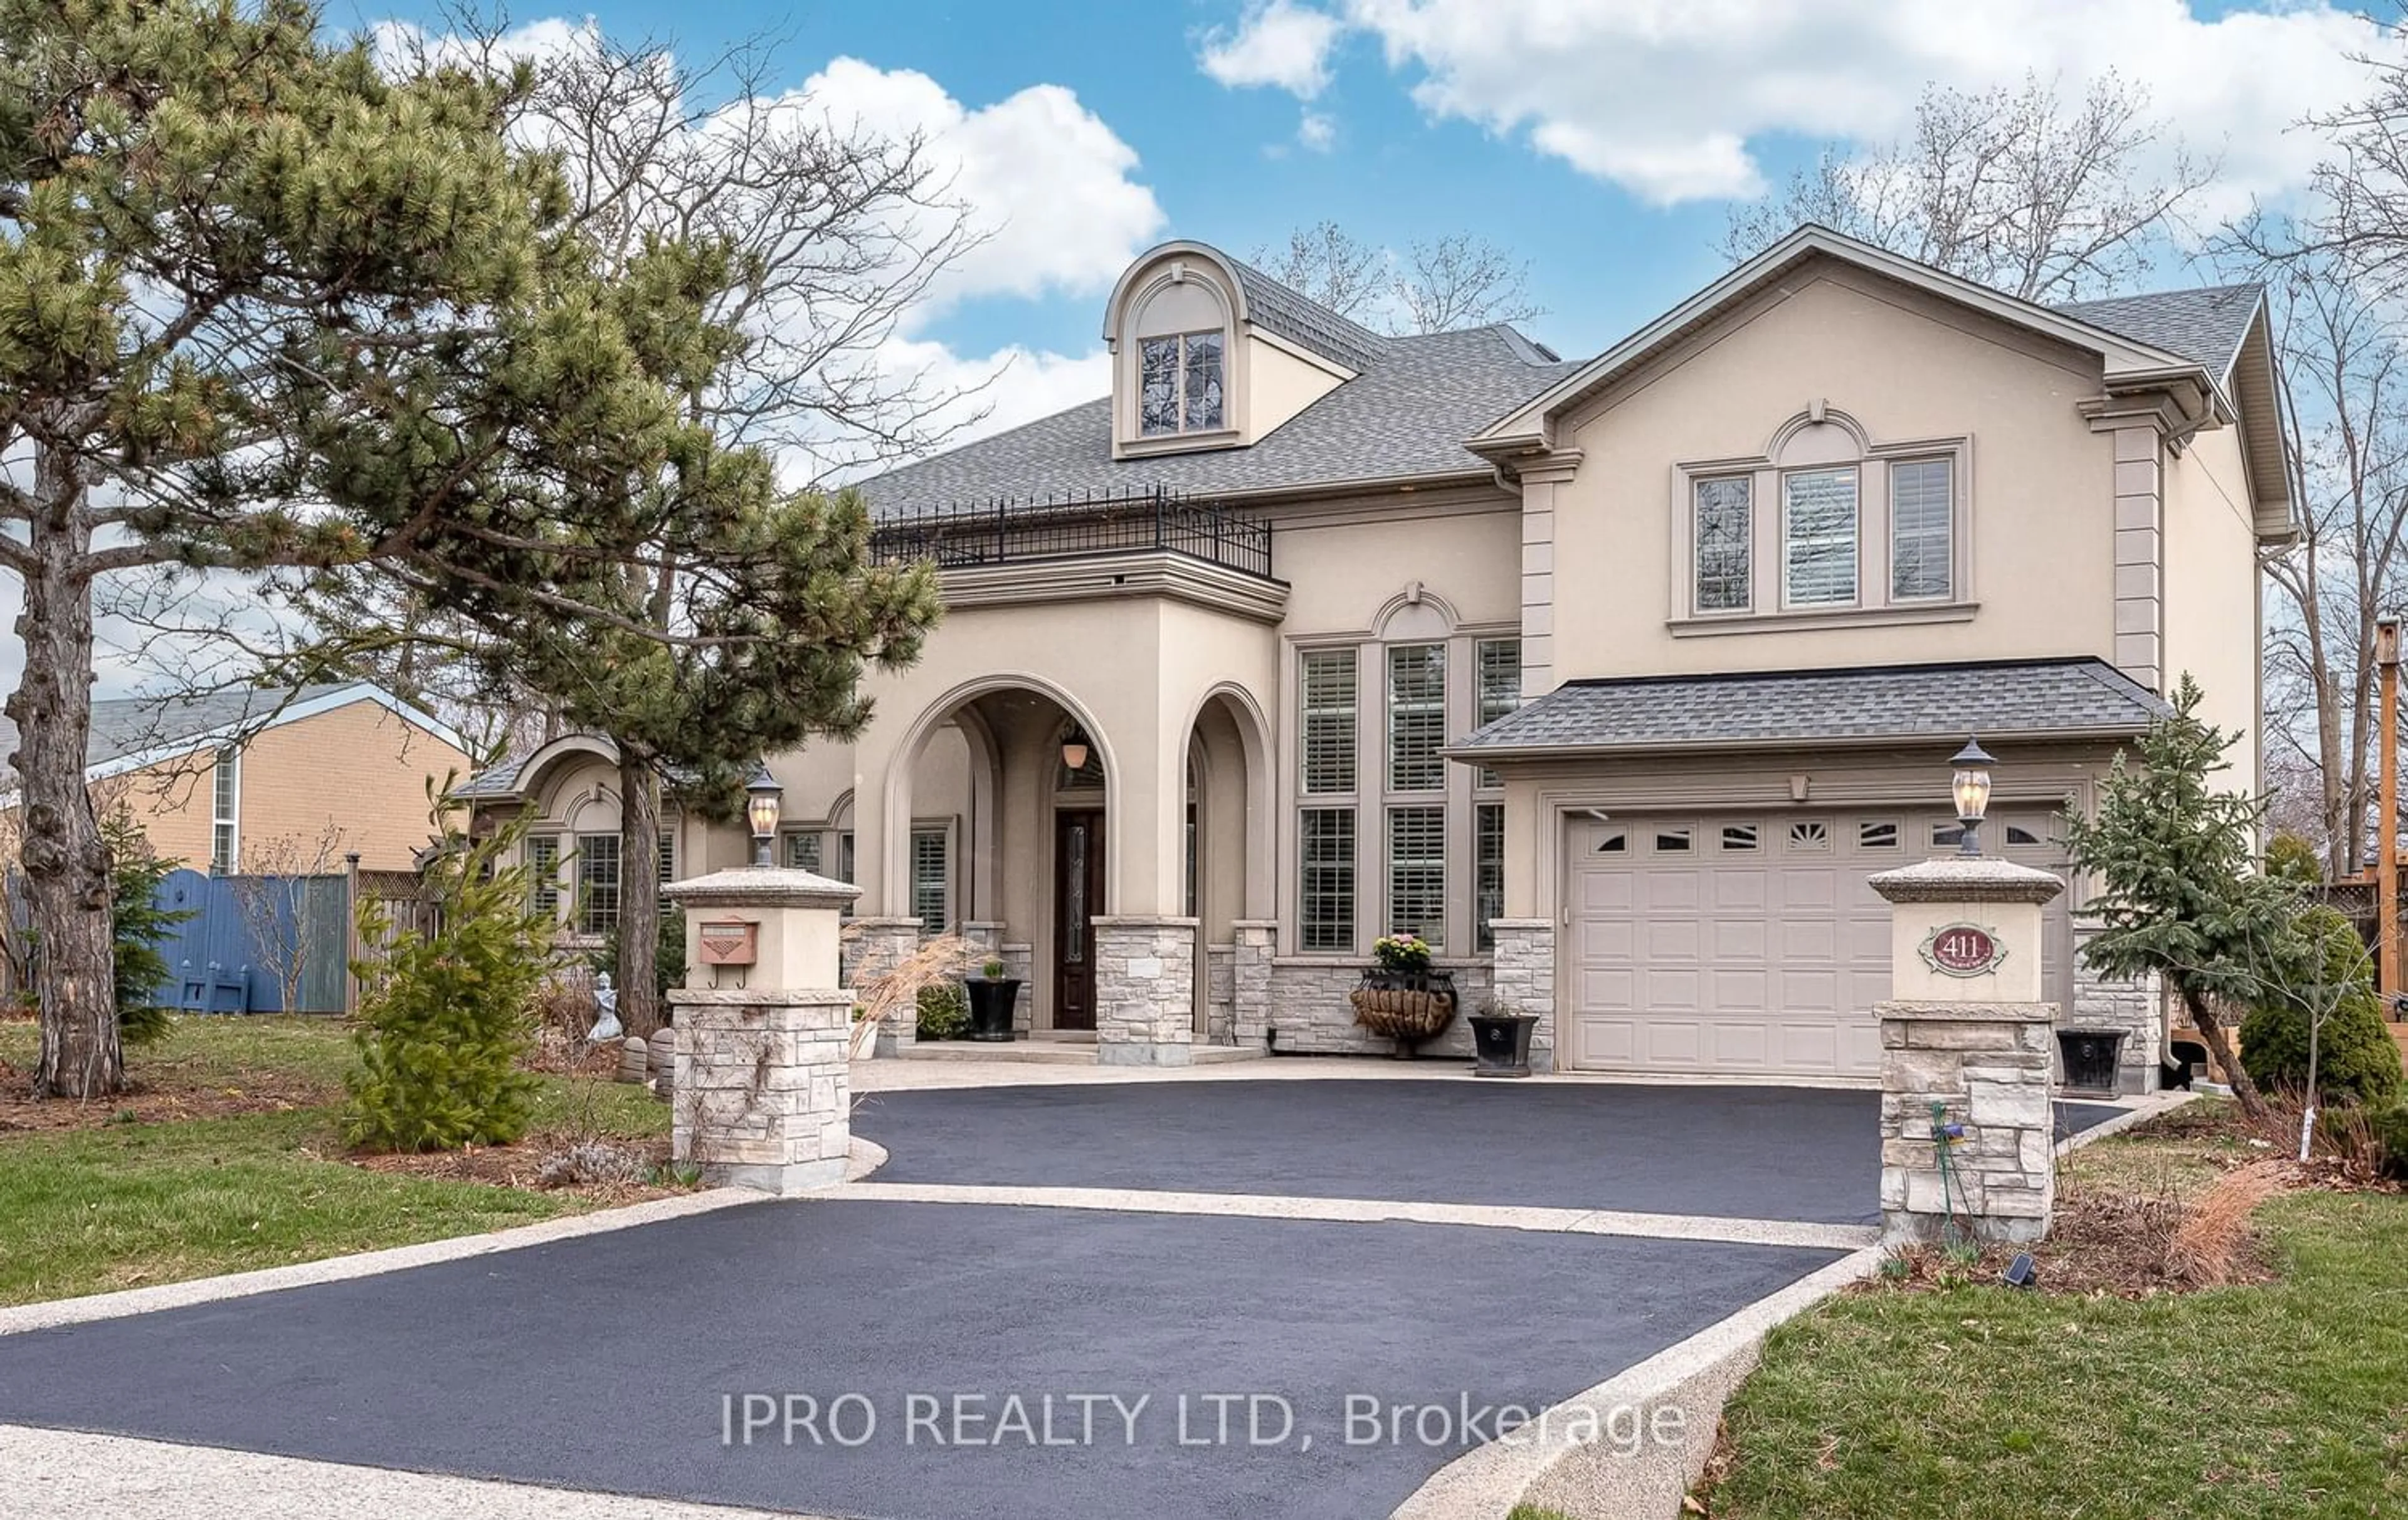 Home with brick exterior material for 411 Seabourne Dr, Oakville Ontario L6L 4E9